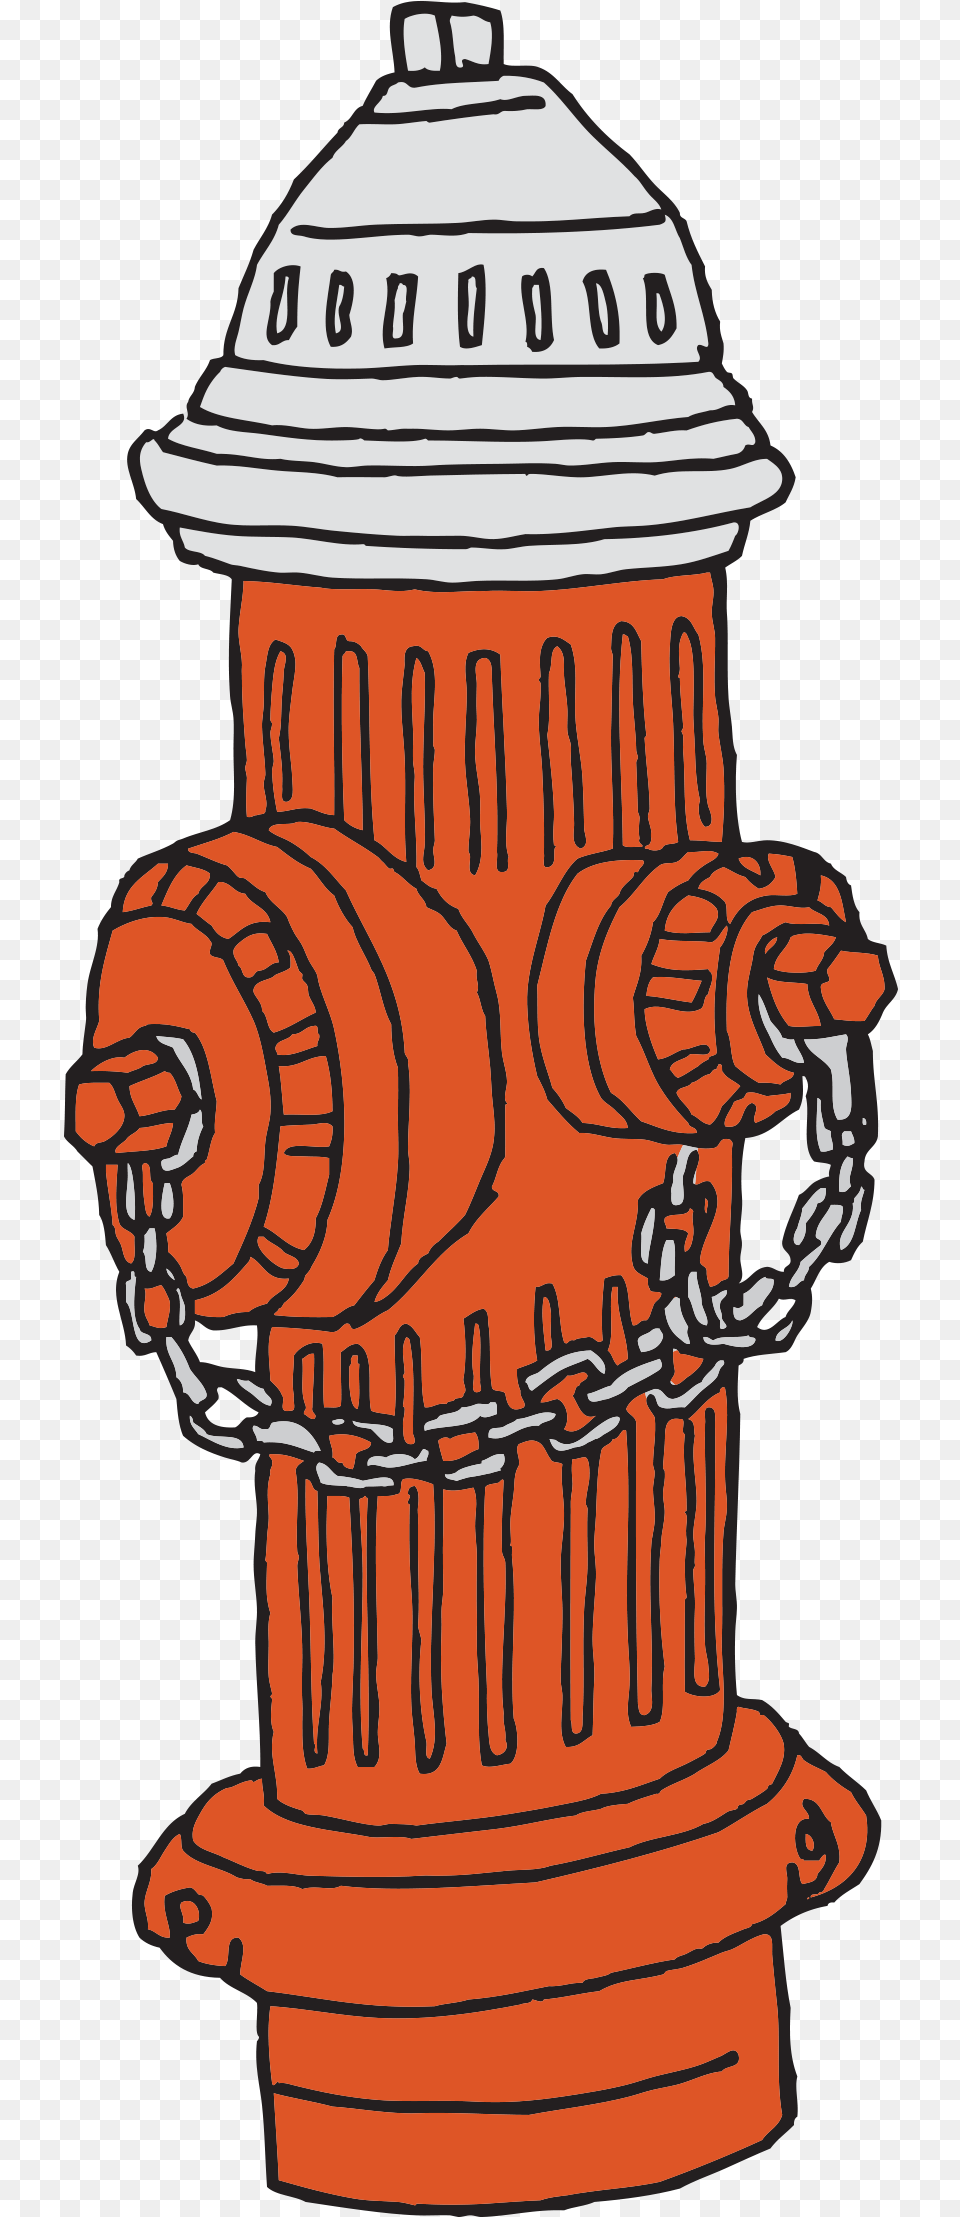 Tattly Fire Hydrant Julia Rothman 00 Fire, Fire Hydrant Free Png Download